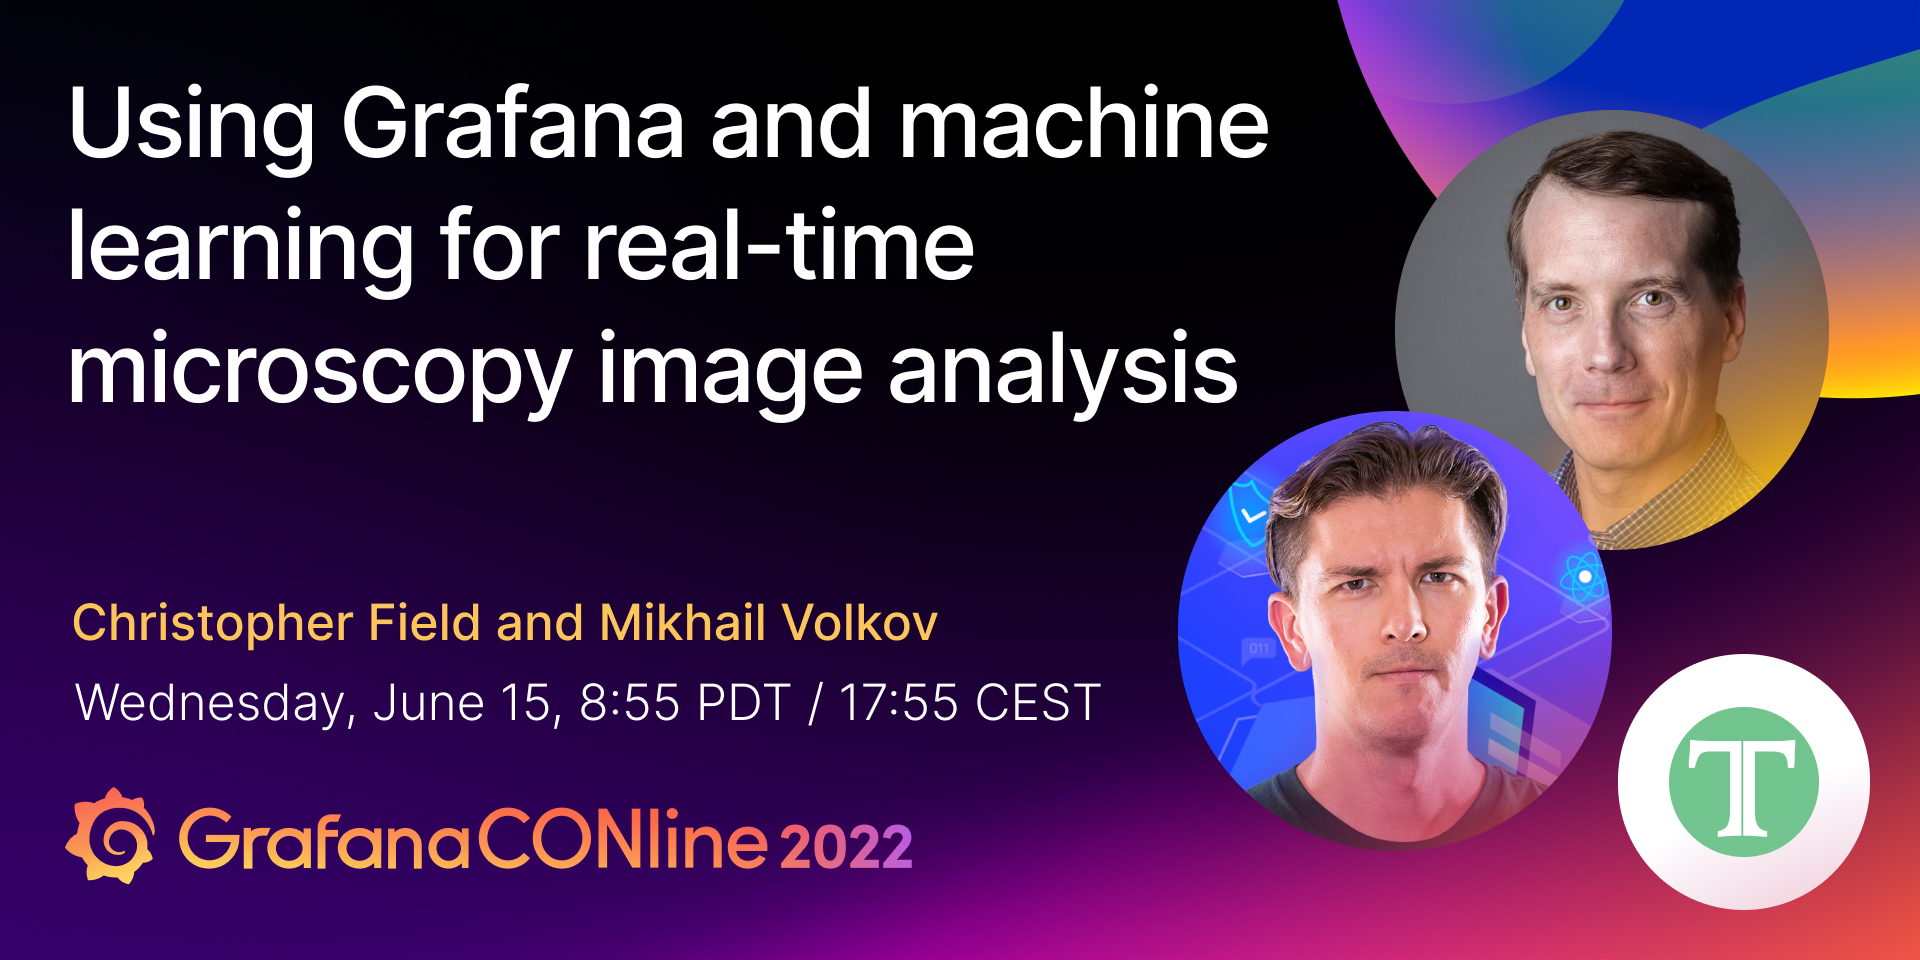 Using Grafana and machine learning for real-time microscopy image analysis